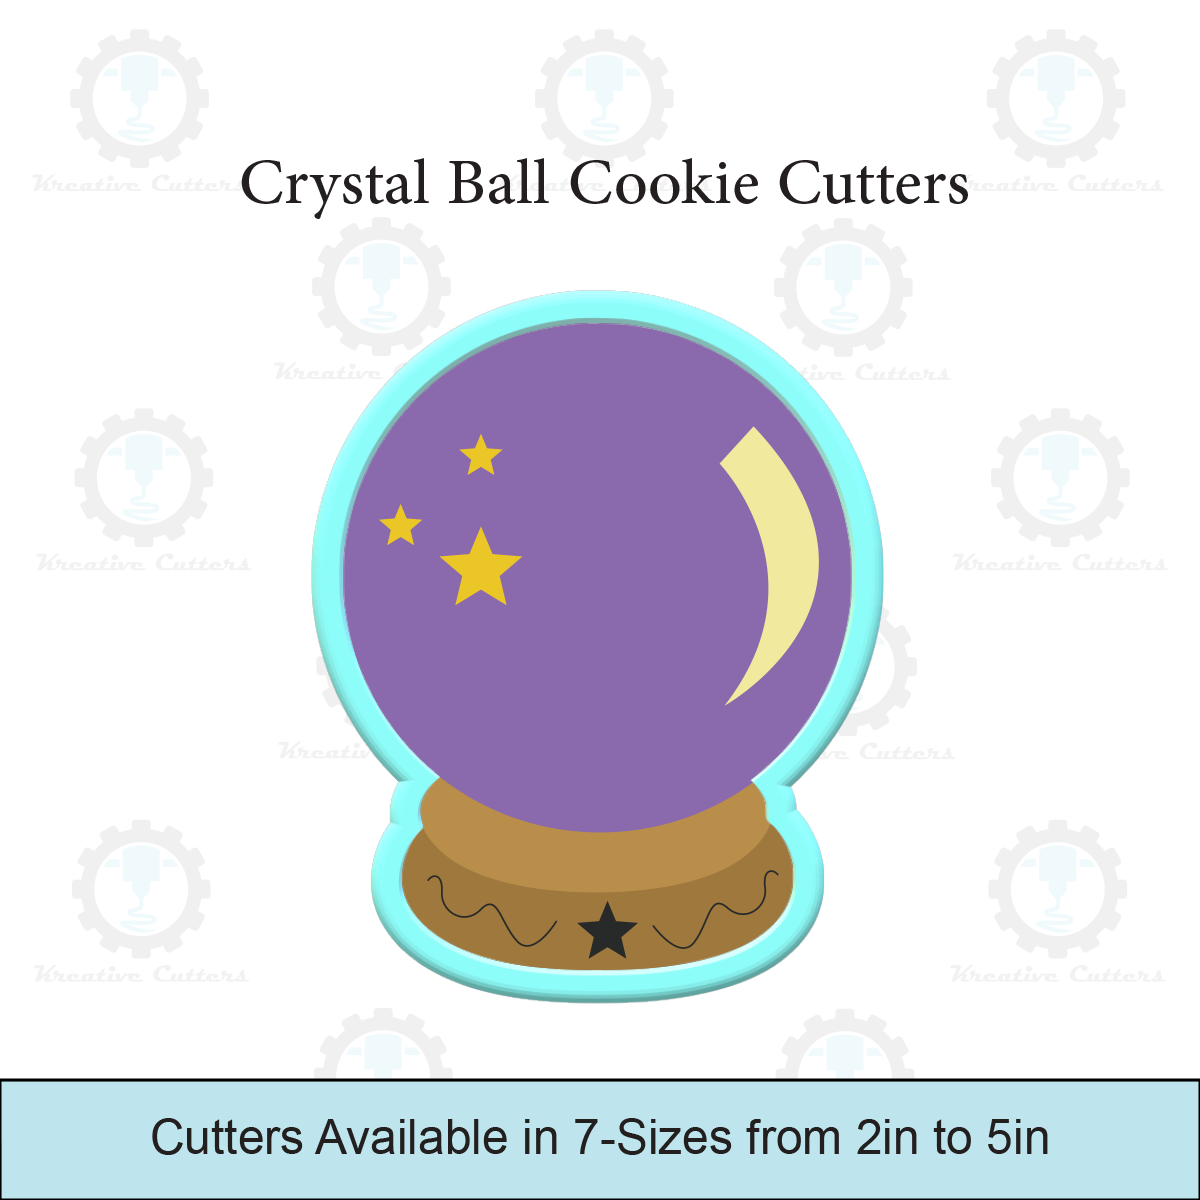 Crystal Ball Cookie Cutters